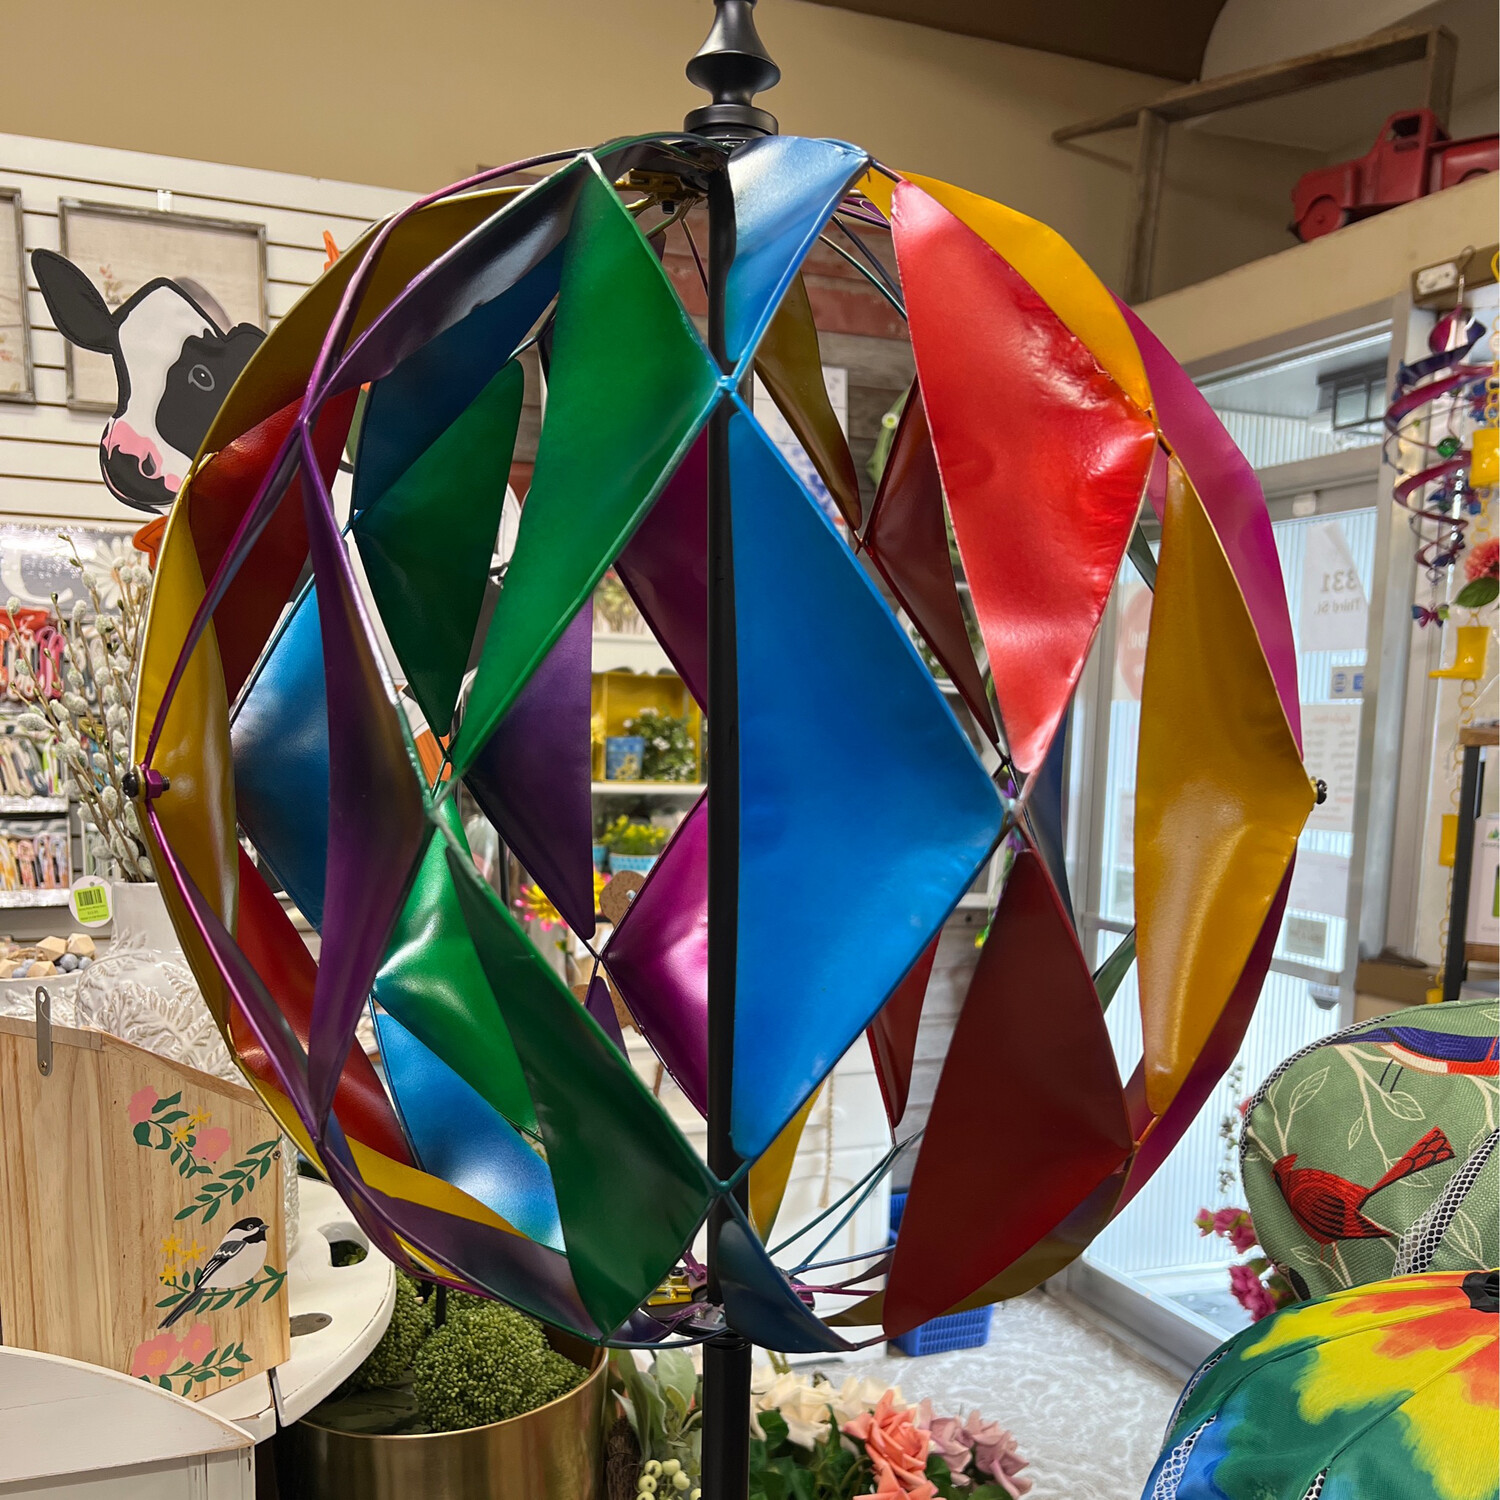 75" Colorful Ball Kinetic Spinner